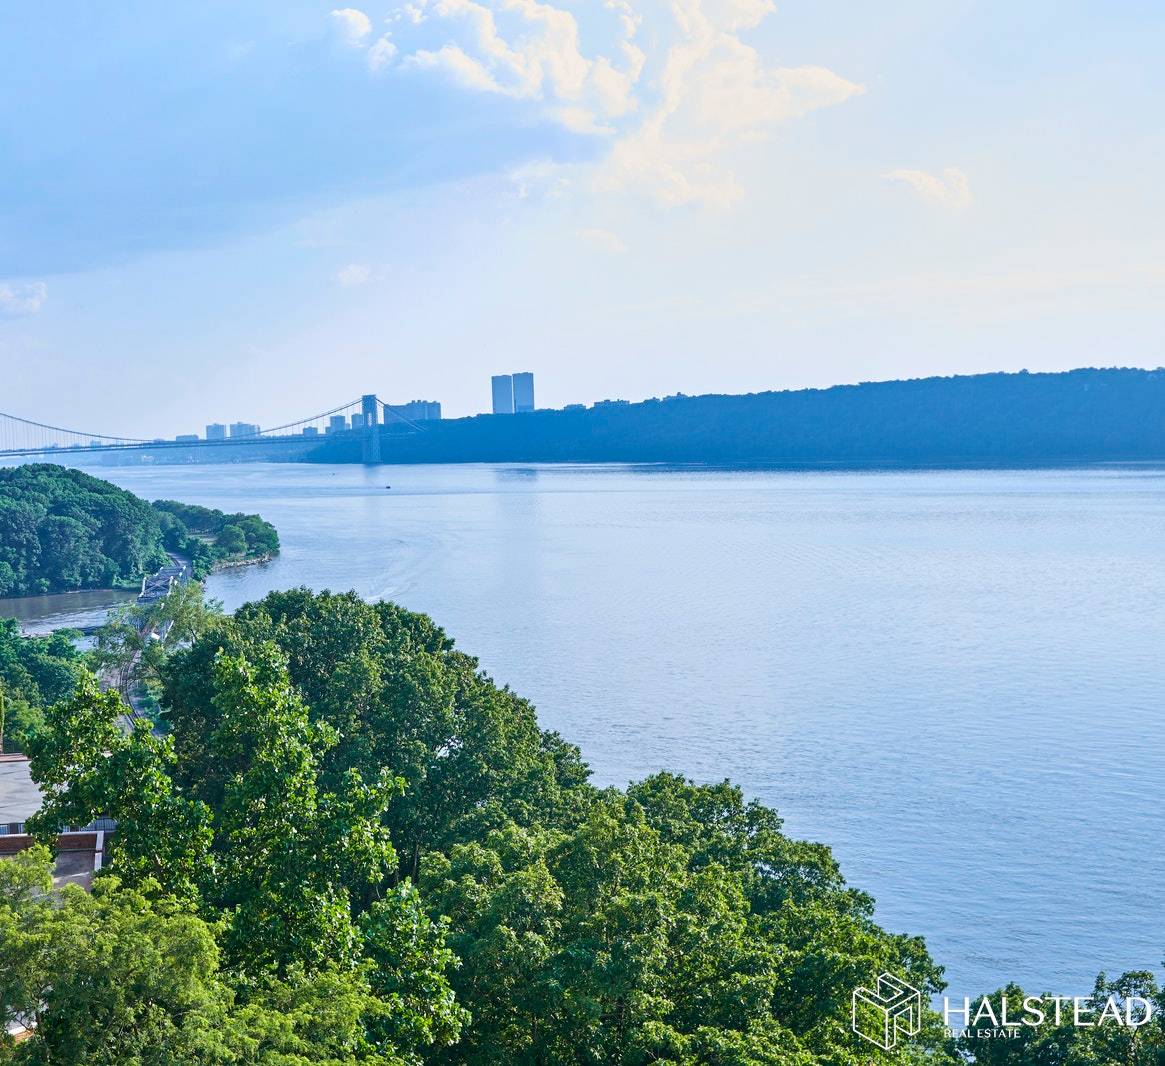 Bask in sunlight with East, South and western exposures with views of the Palisades, Hudson River and the GWB, enjoy spectacular sunsets from the year round enclosed Balcony.